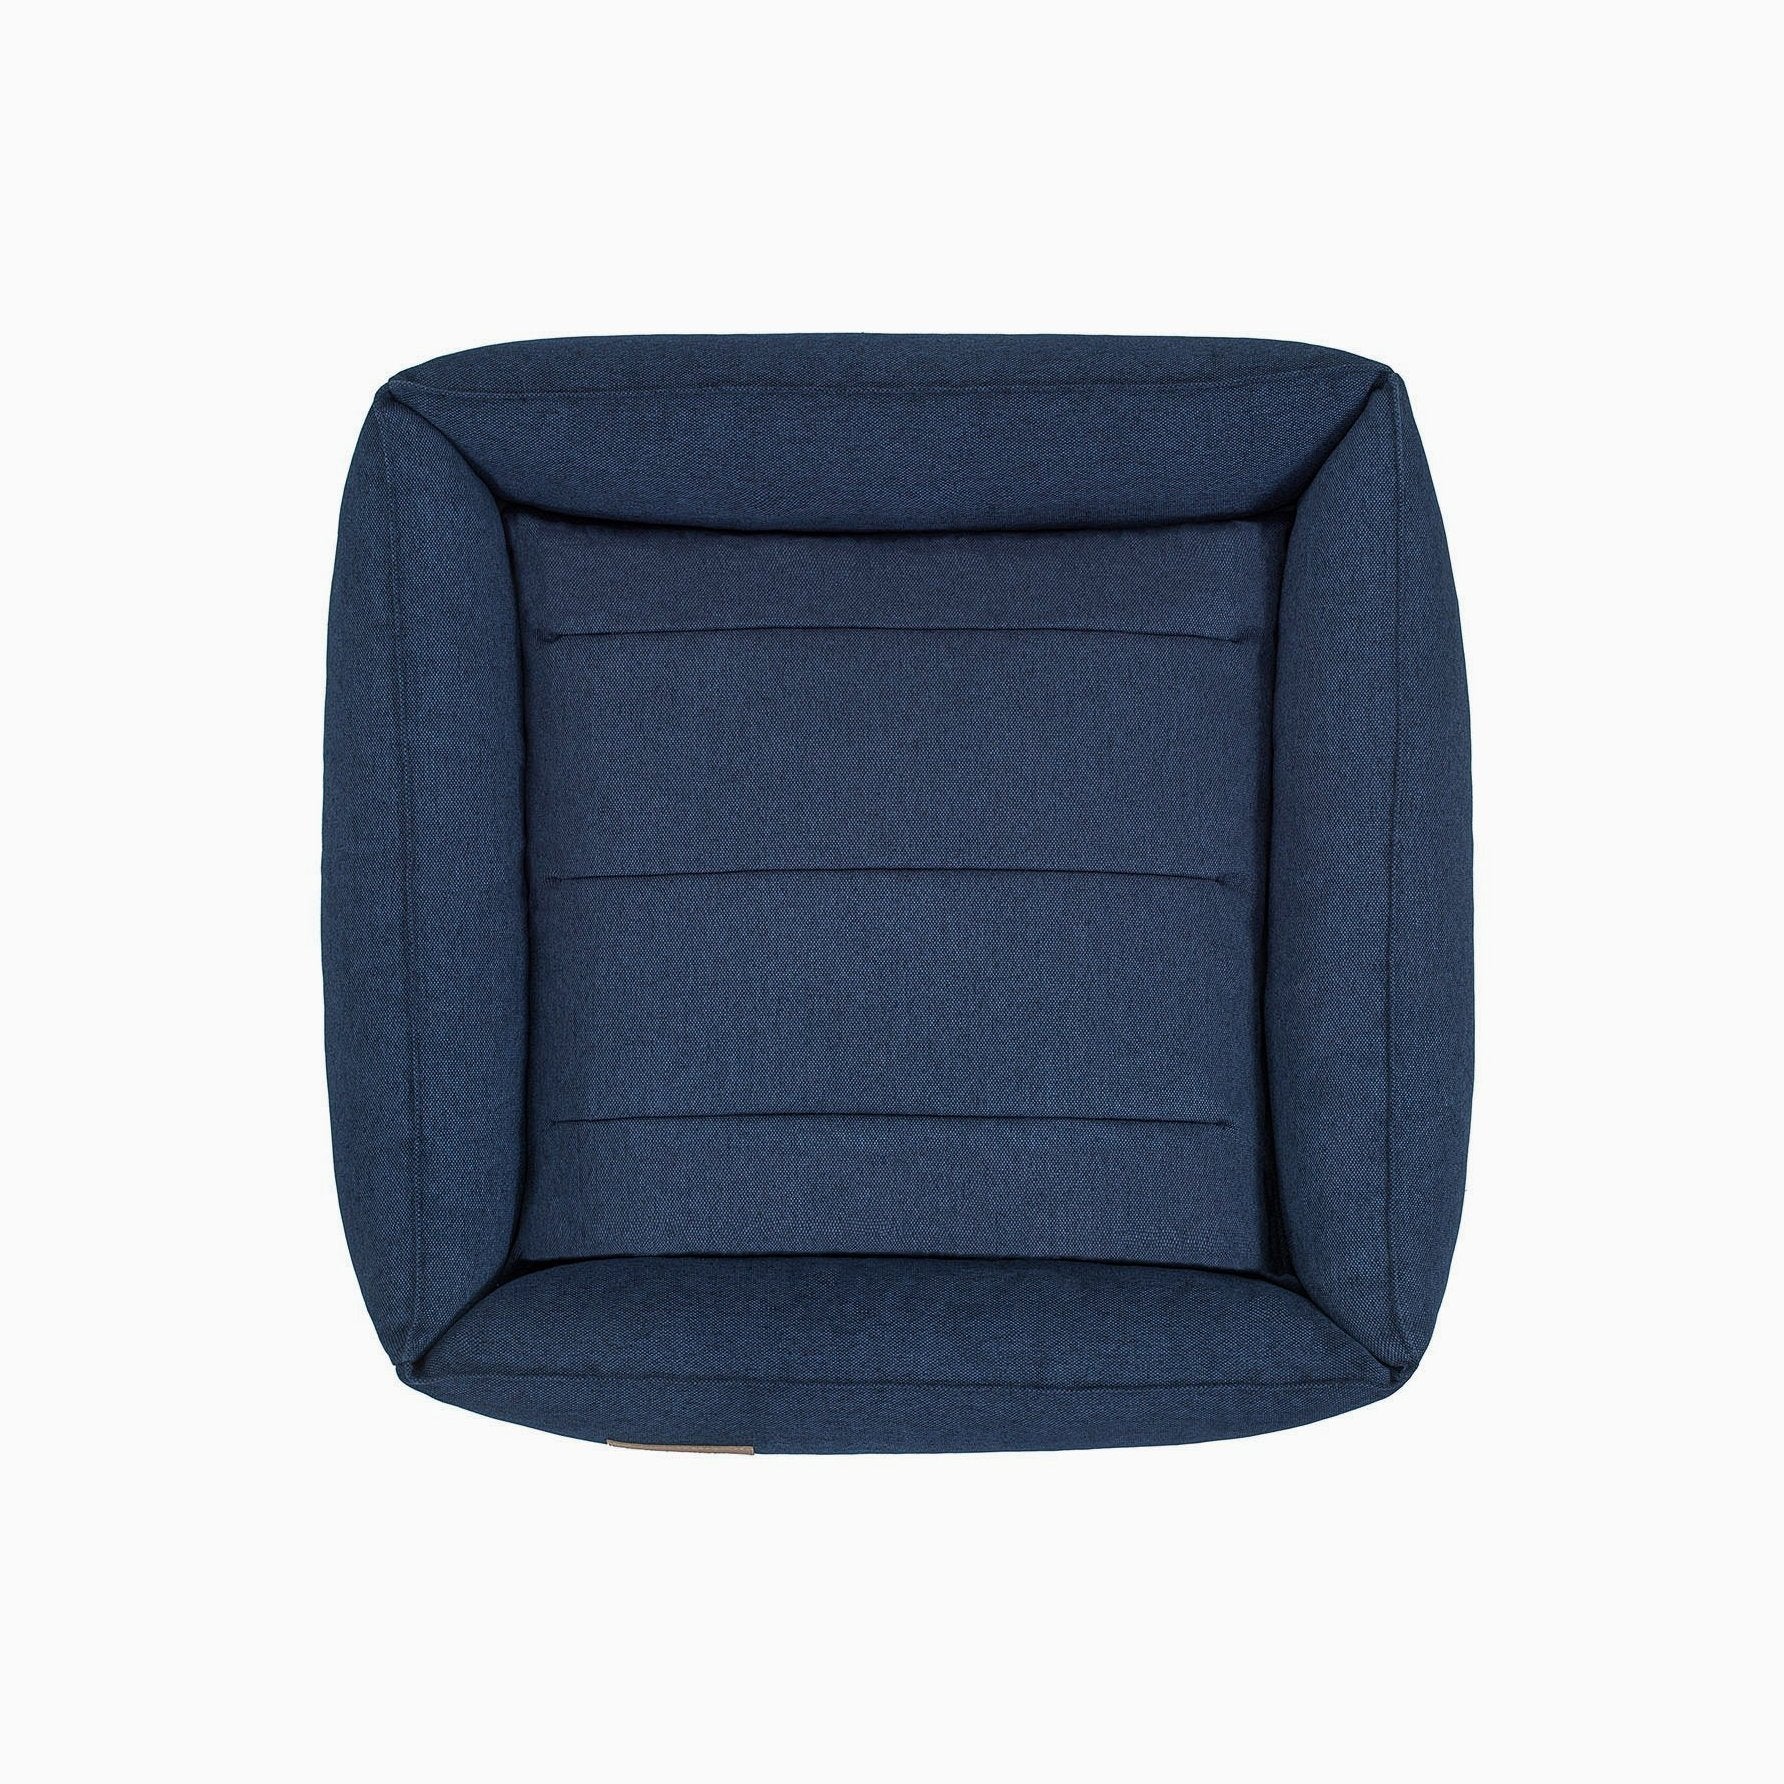 Urban Dog Bed - Navy - NEW PETS ON THE BLOCK.COM